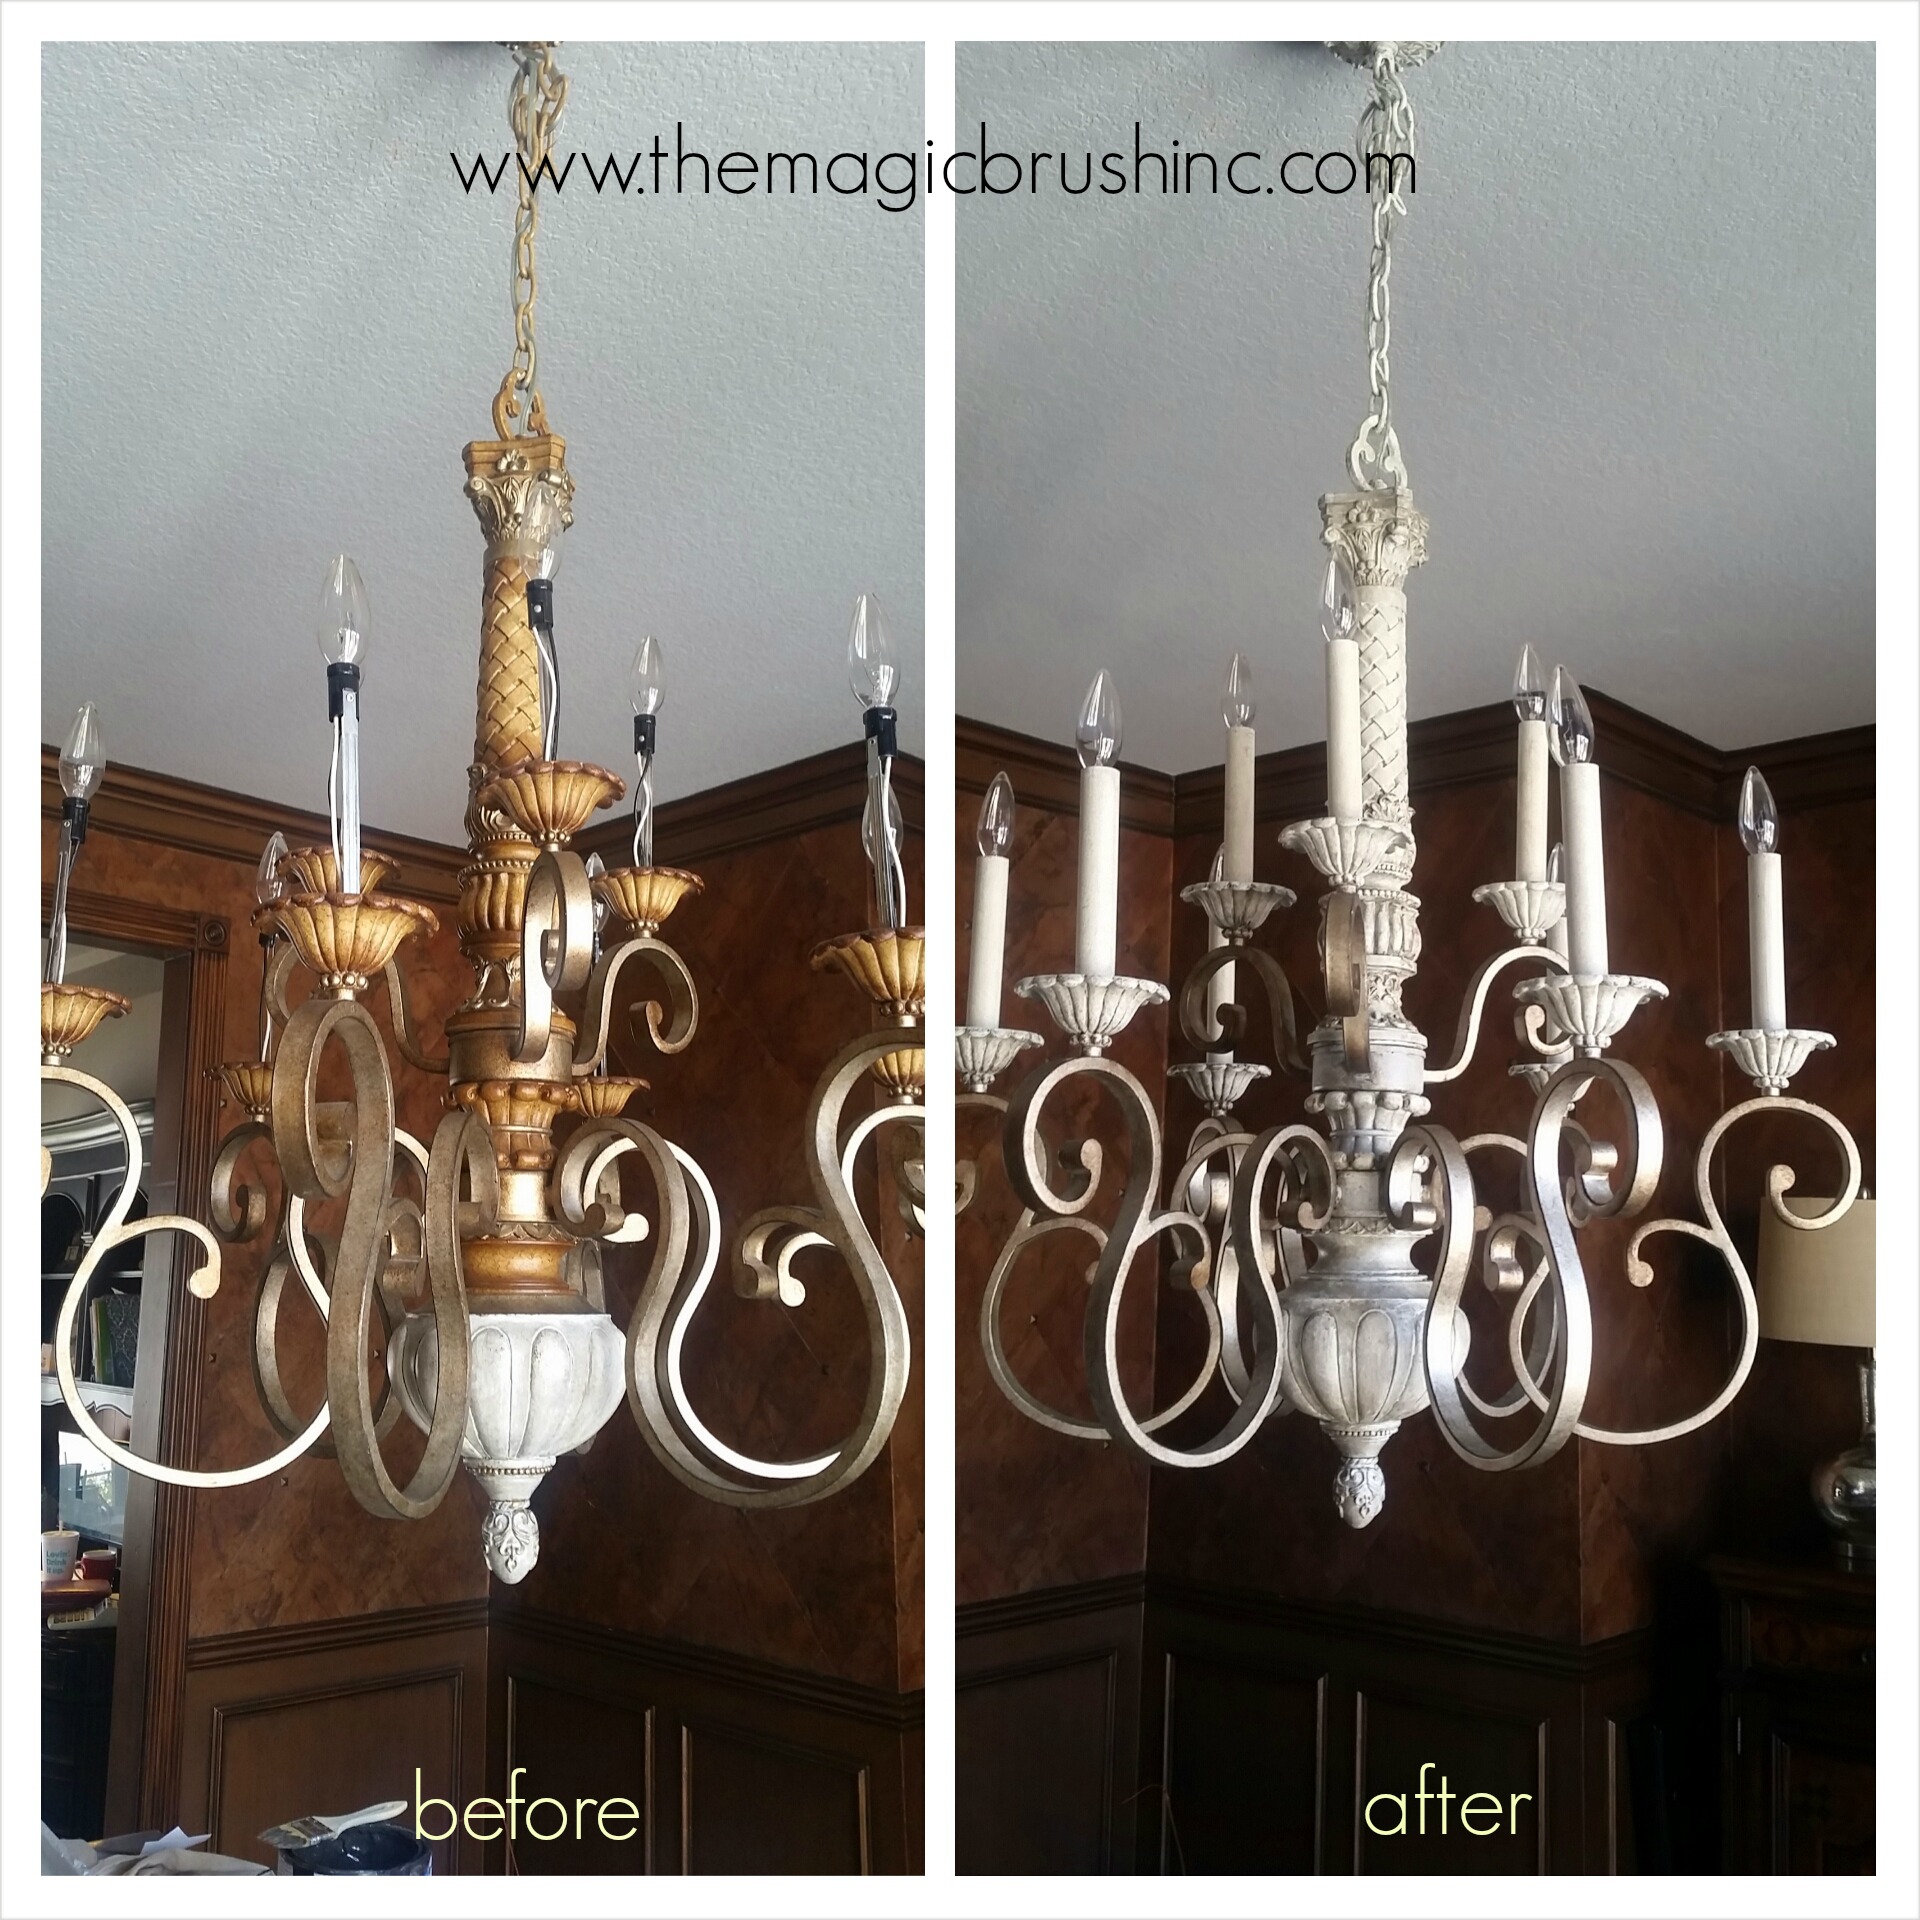 Painting Light Fixtures And Chandeliers, How To Paint A Brass Chandelier Black